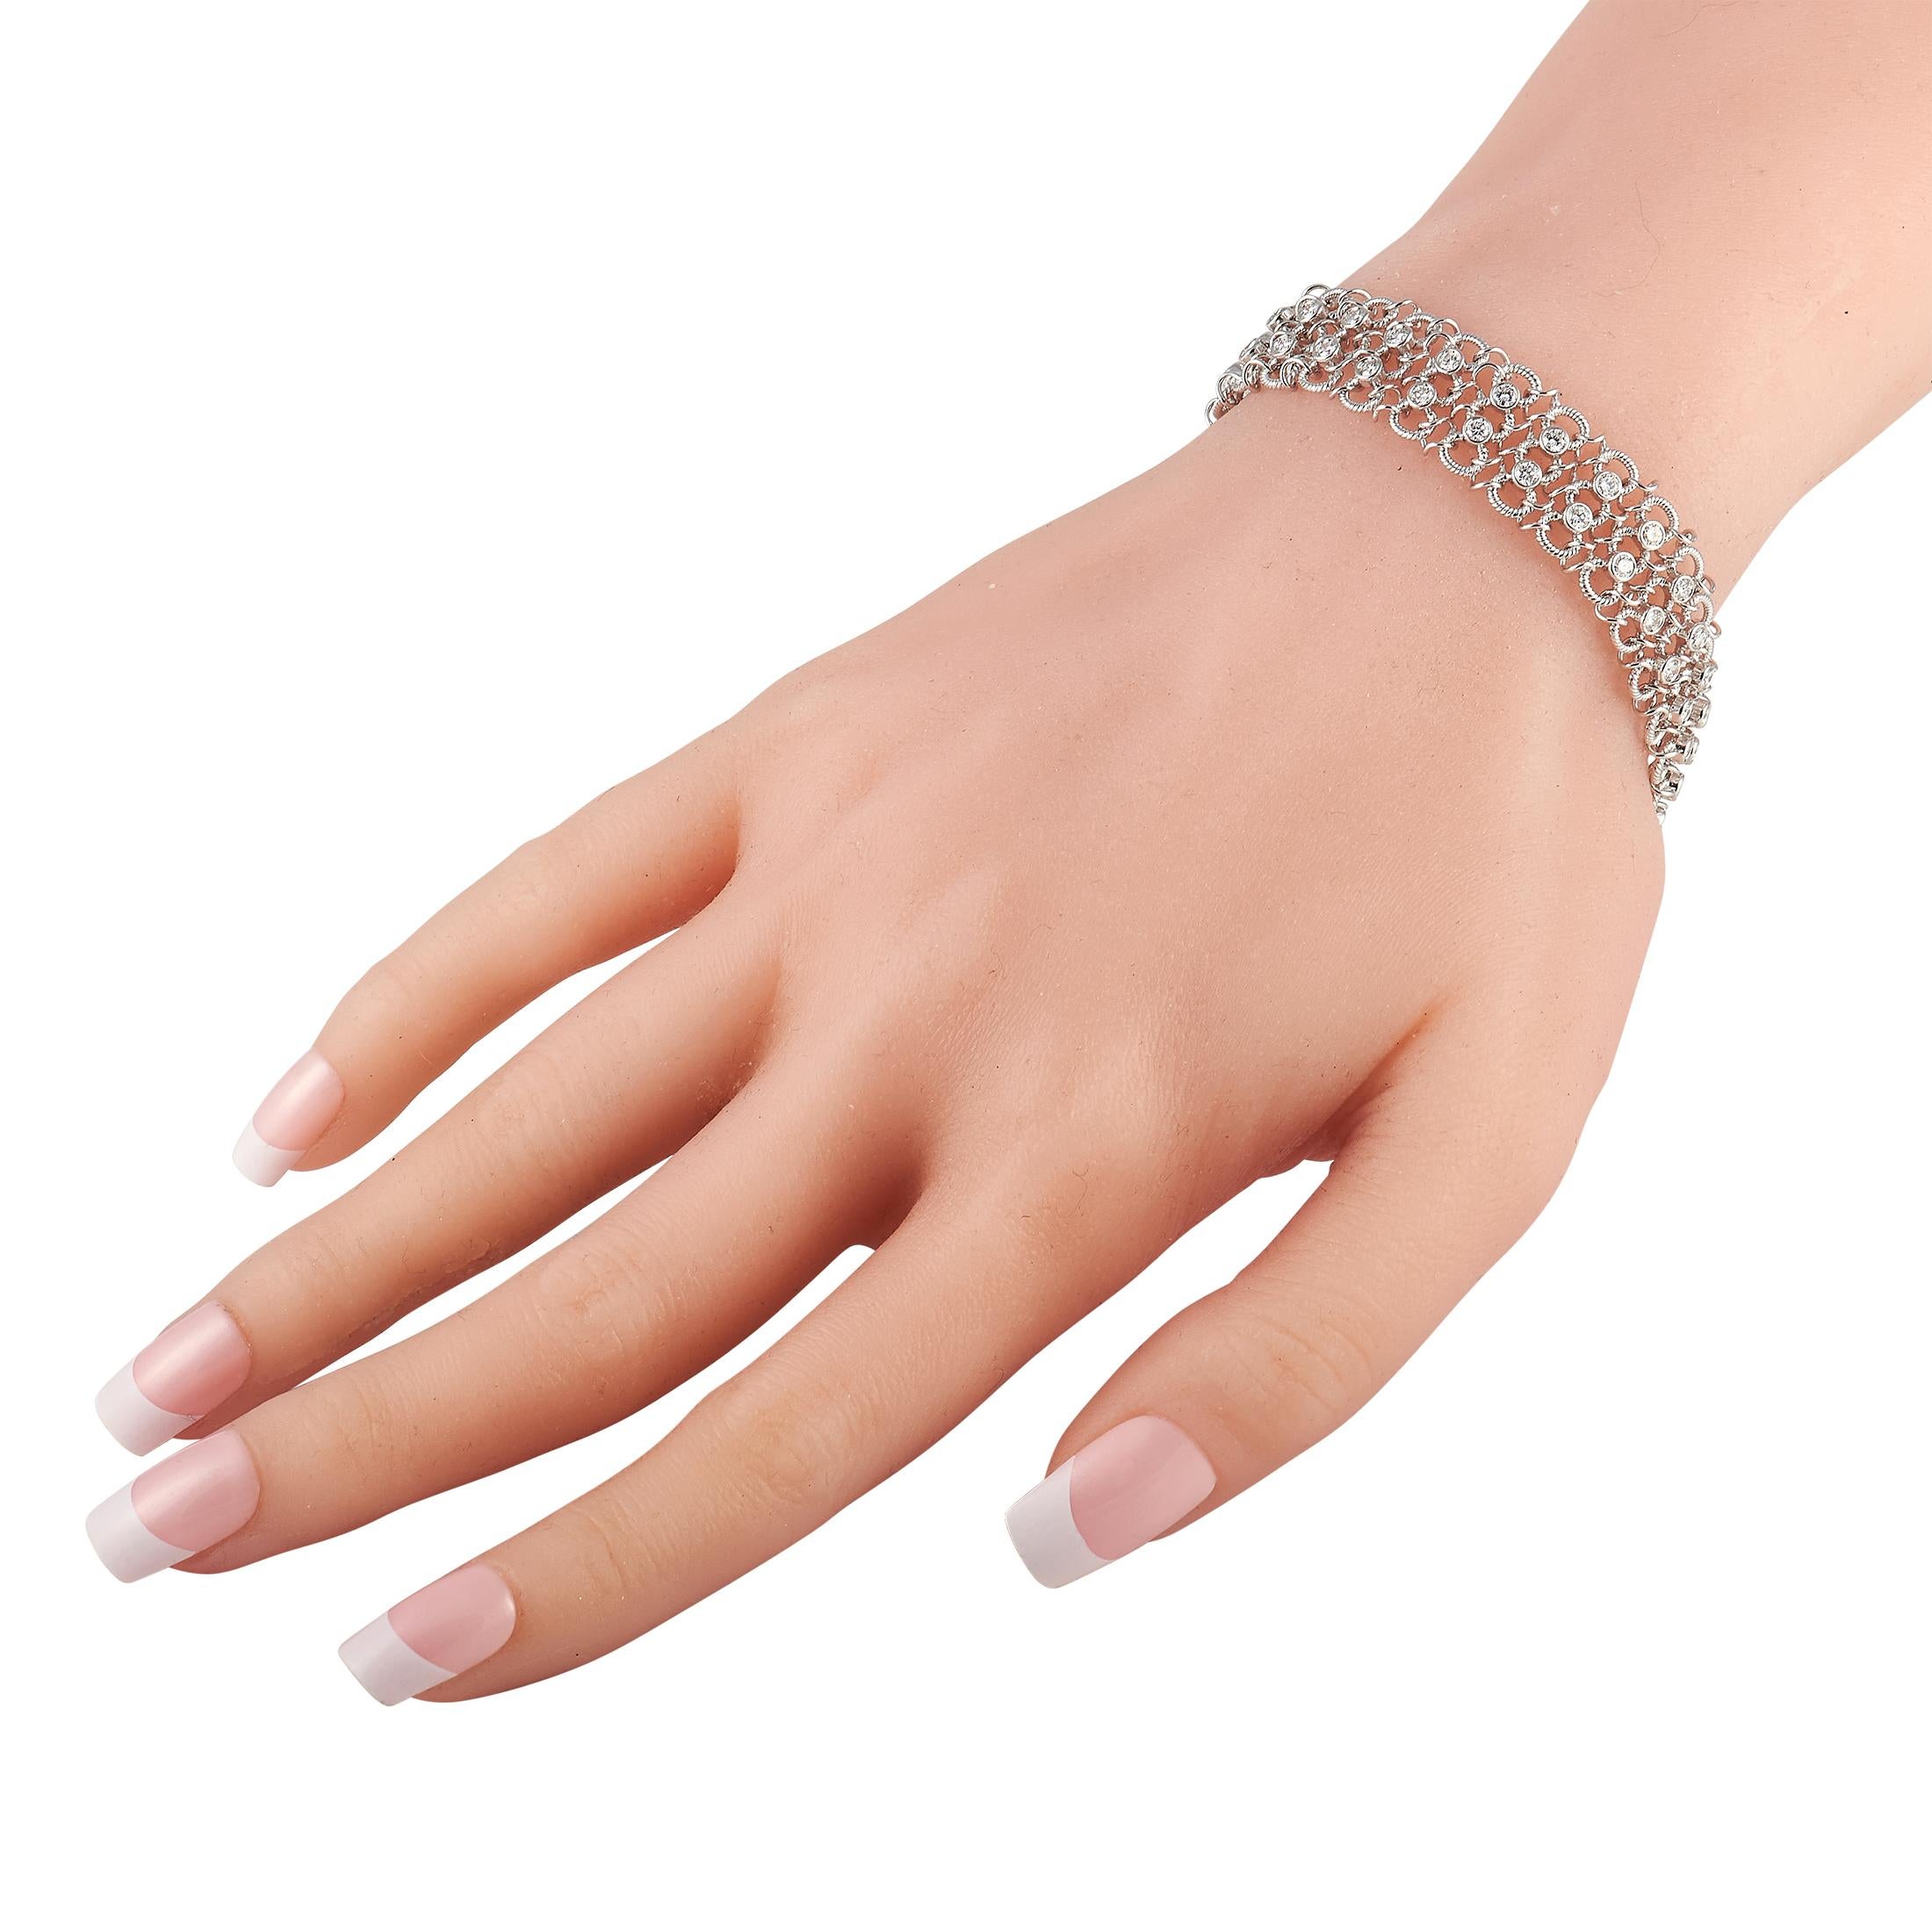 Adorn your wrist with this diamond mesh bracelet for an elegantly chic look. This Piero Milano creation features an 18-karat white gold mesh bracelet made up of intertwined links and round diamond accents that total 3.05 carats. This flexible